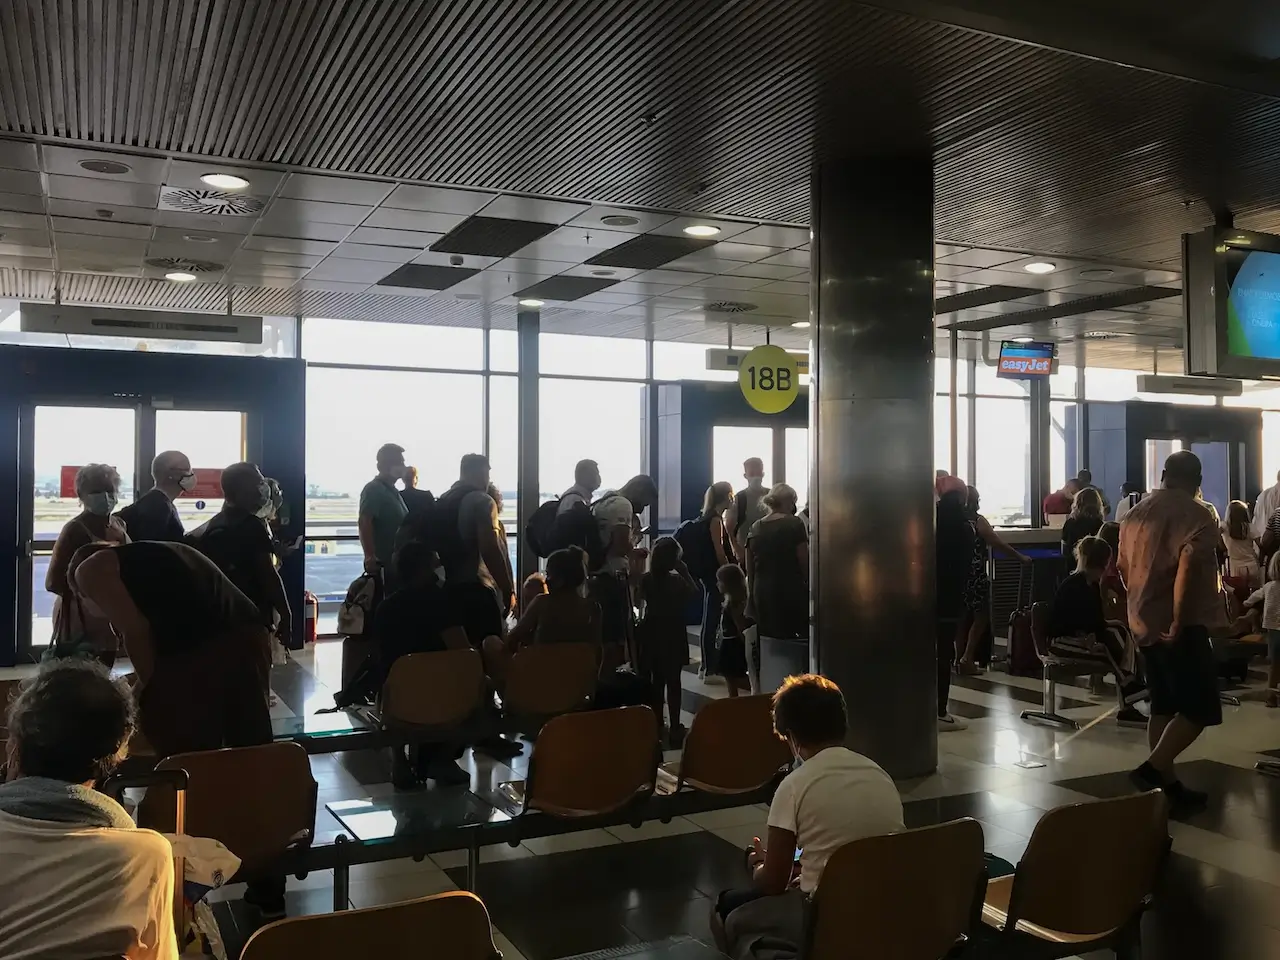 Passengers waiting to board a delayed airplane in Greece